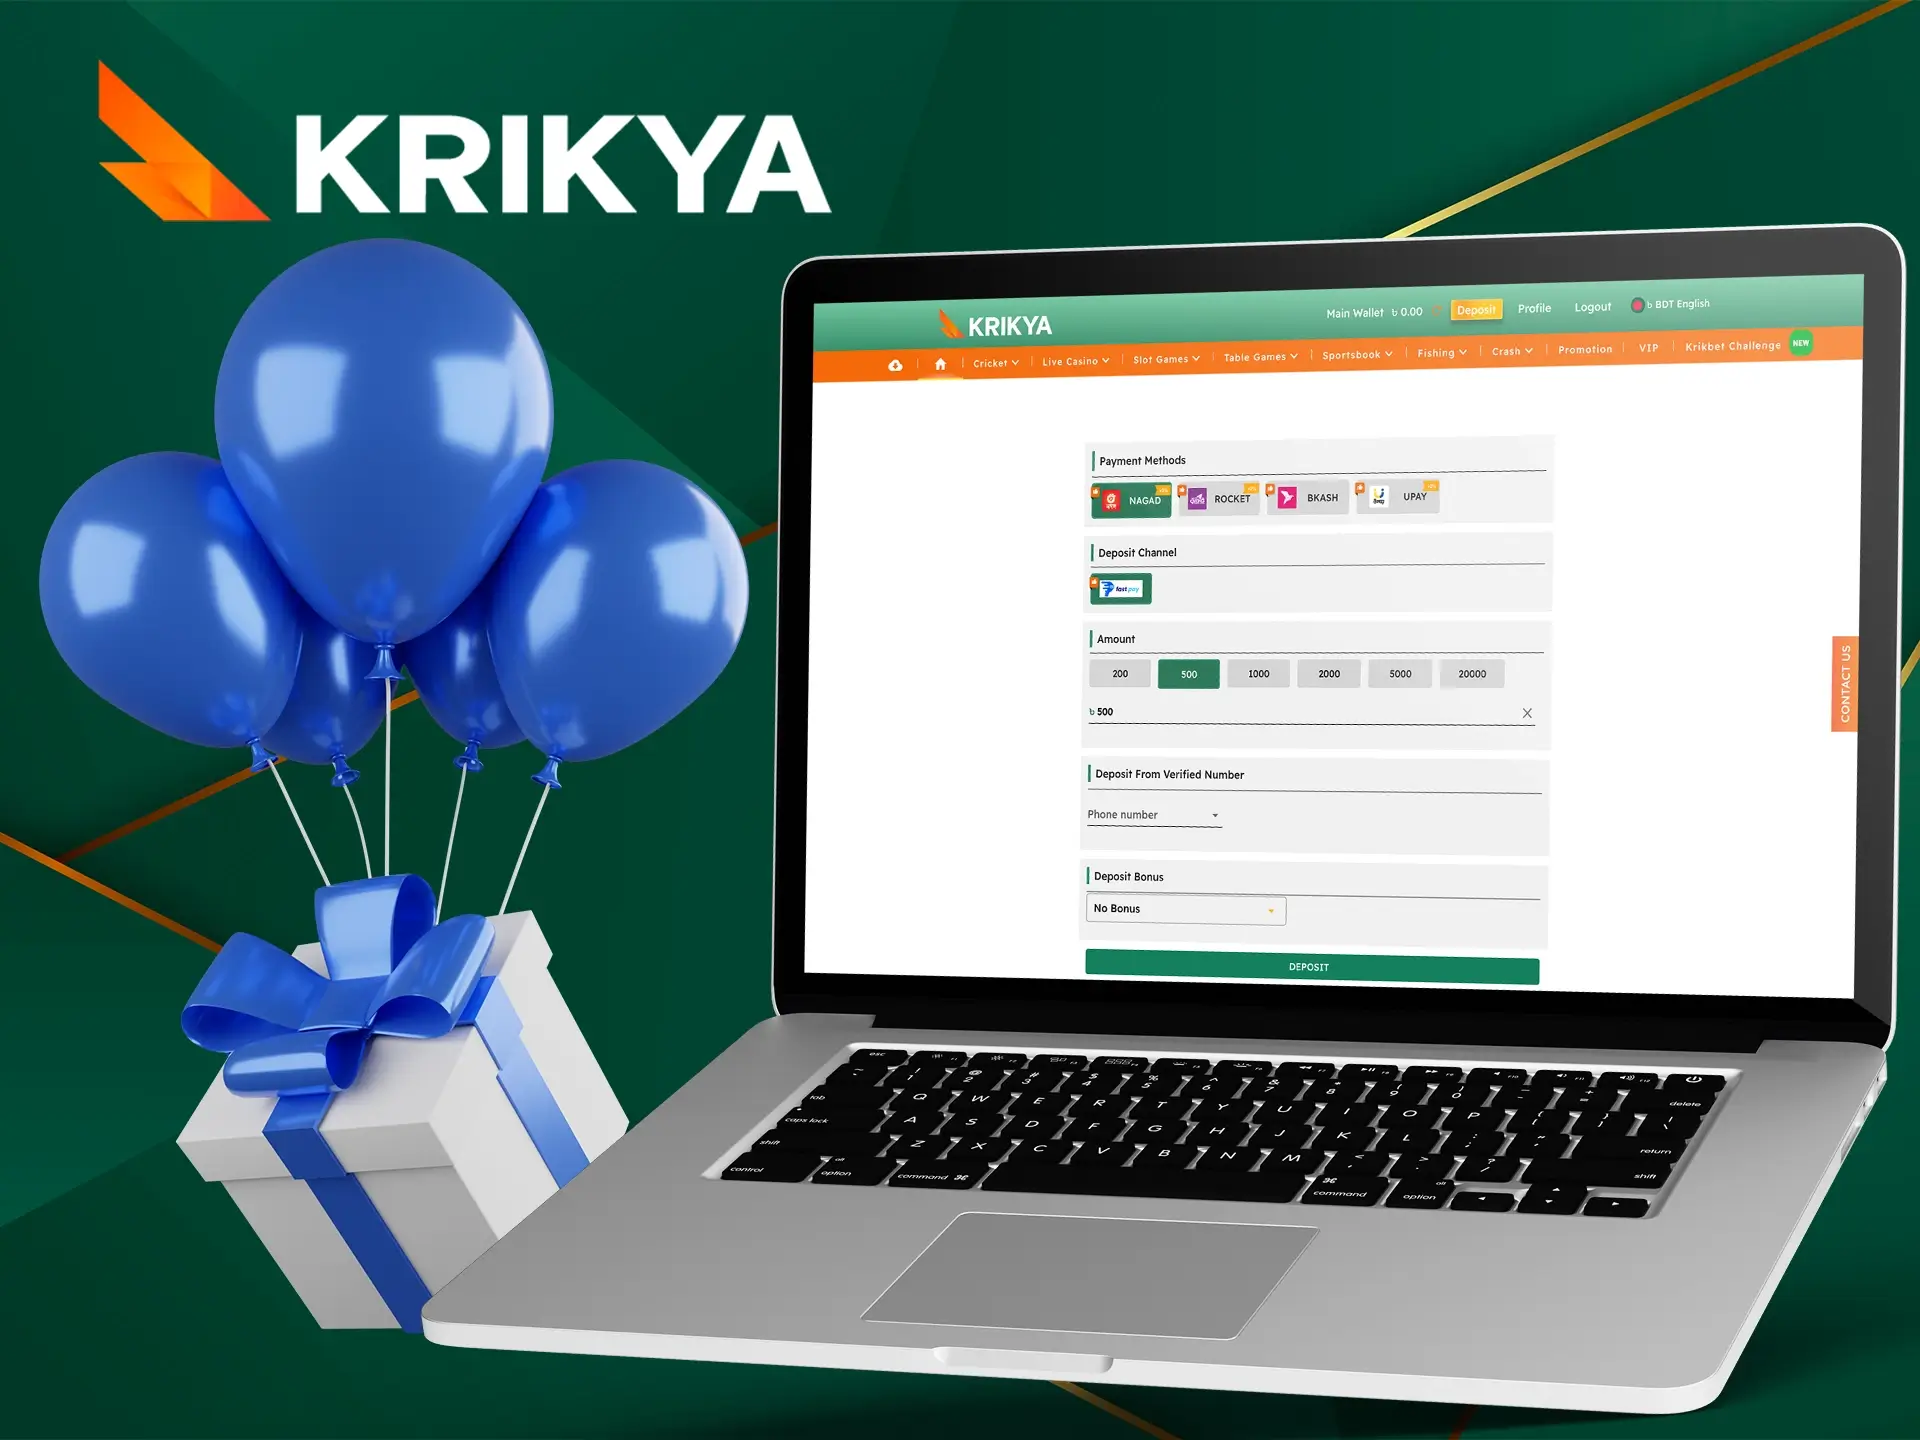 When registering, enter your details carefully and you are sure to receive your coveted gift from Krikya.